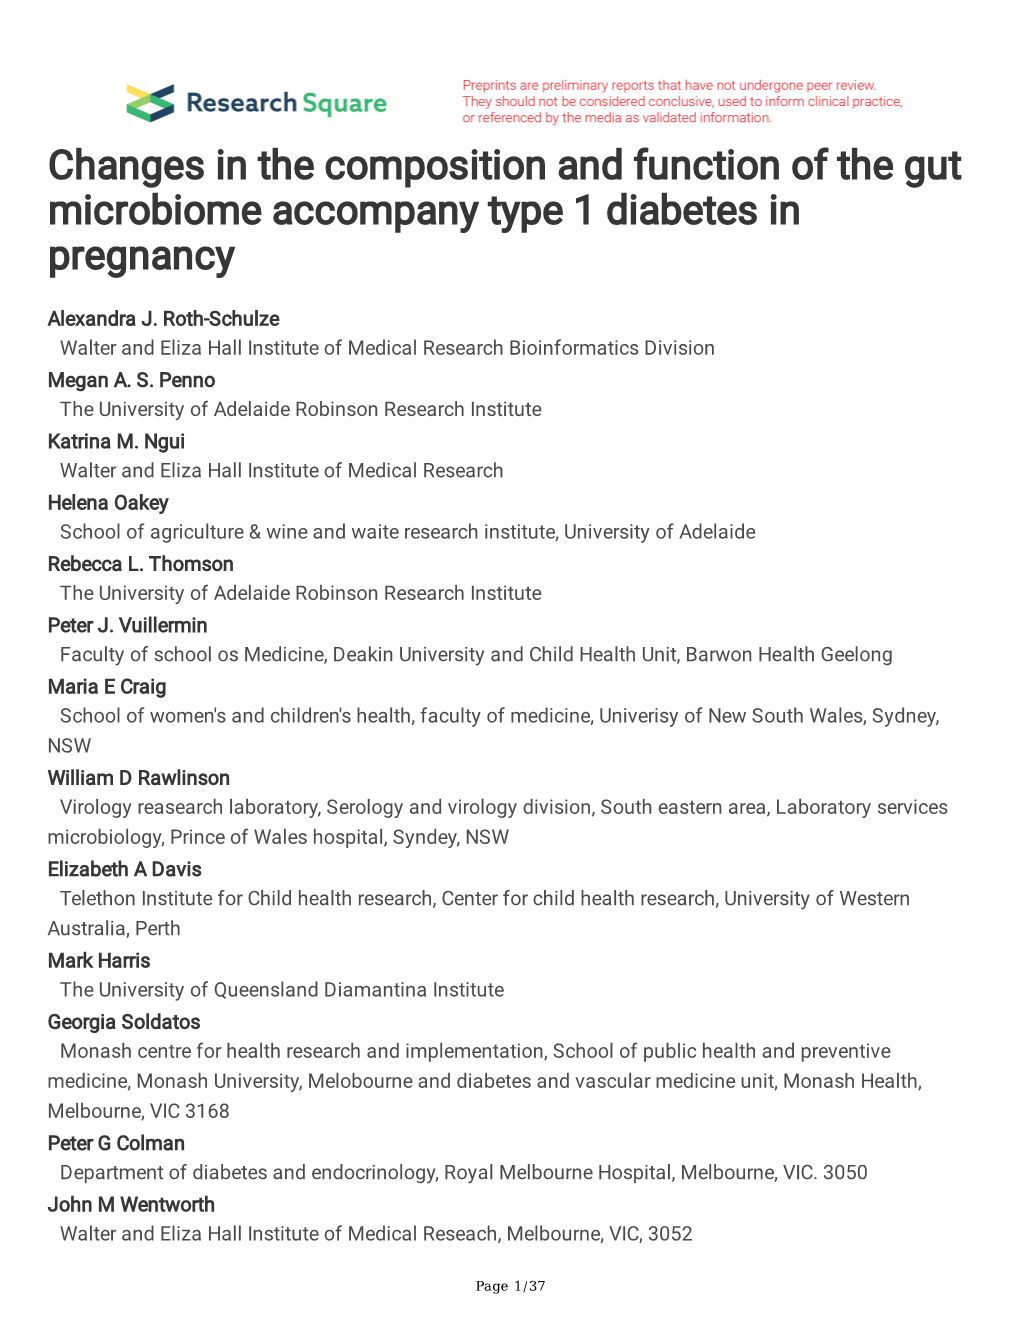 Changes in the Composition and Function of the Gut Microbiome Accompany Type 1 Diabetes in Pregnancy